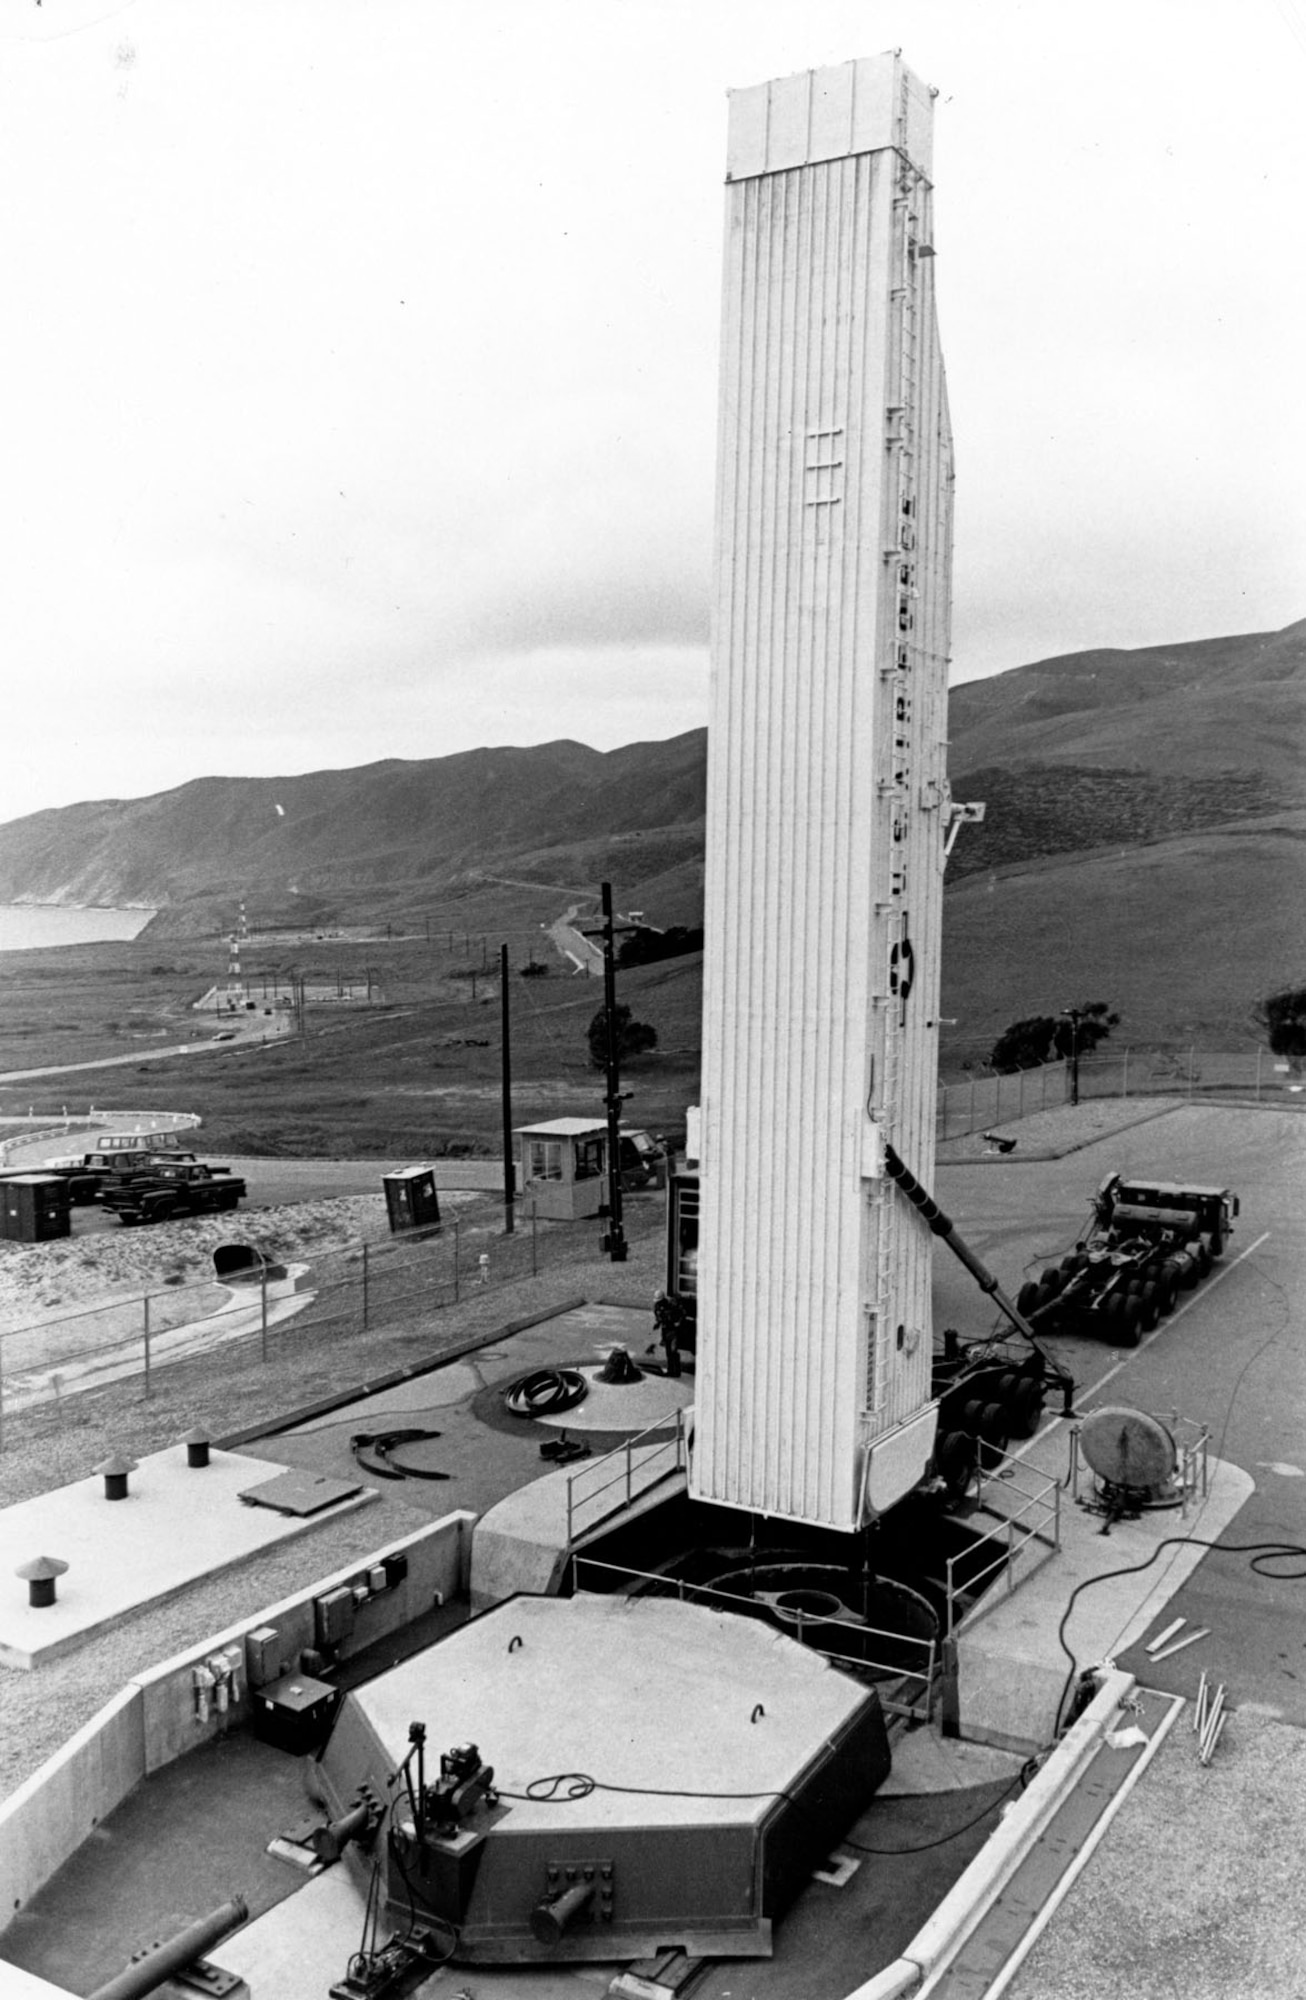 The transporter erector can hoist or lower a missile into the silo by elevating its trailer to a vertical position. This test and training silo is at Vandenberg AFB, Calif. (U.S. Air Force photo)